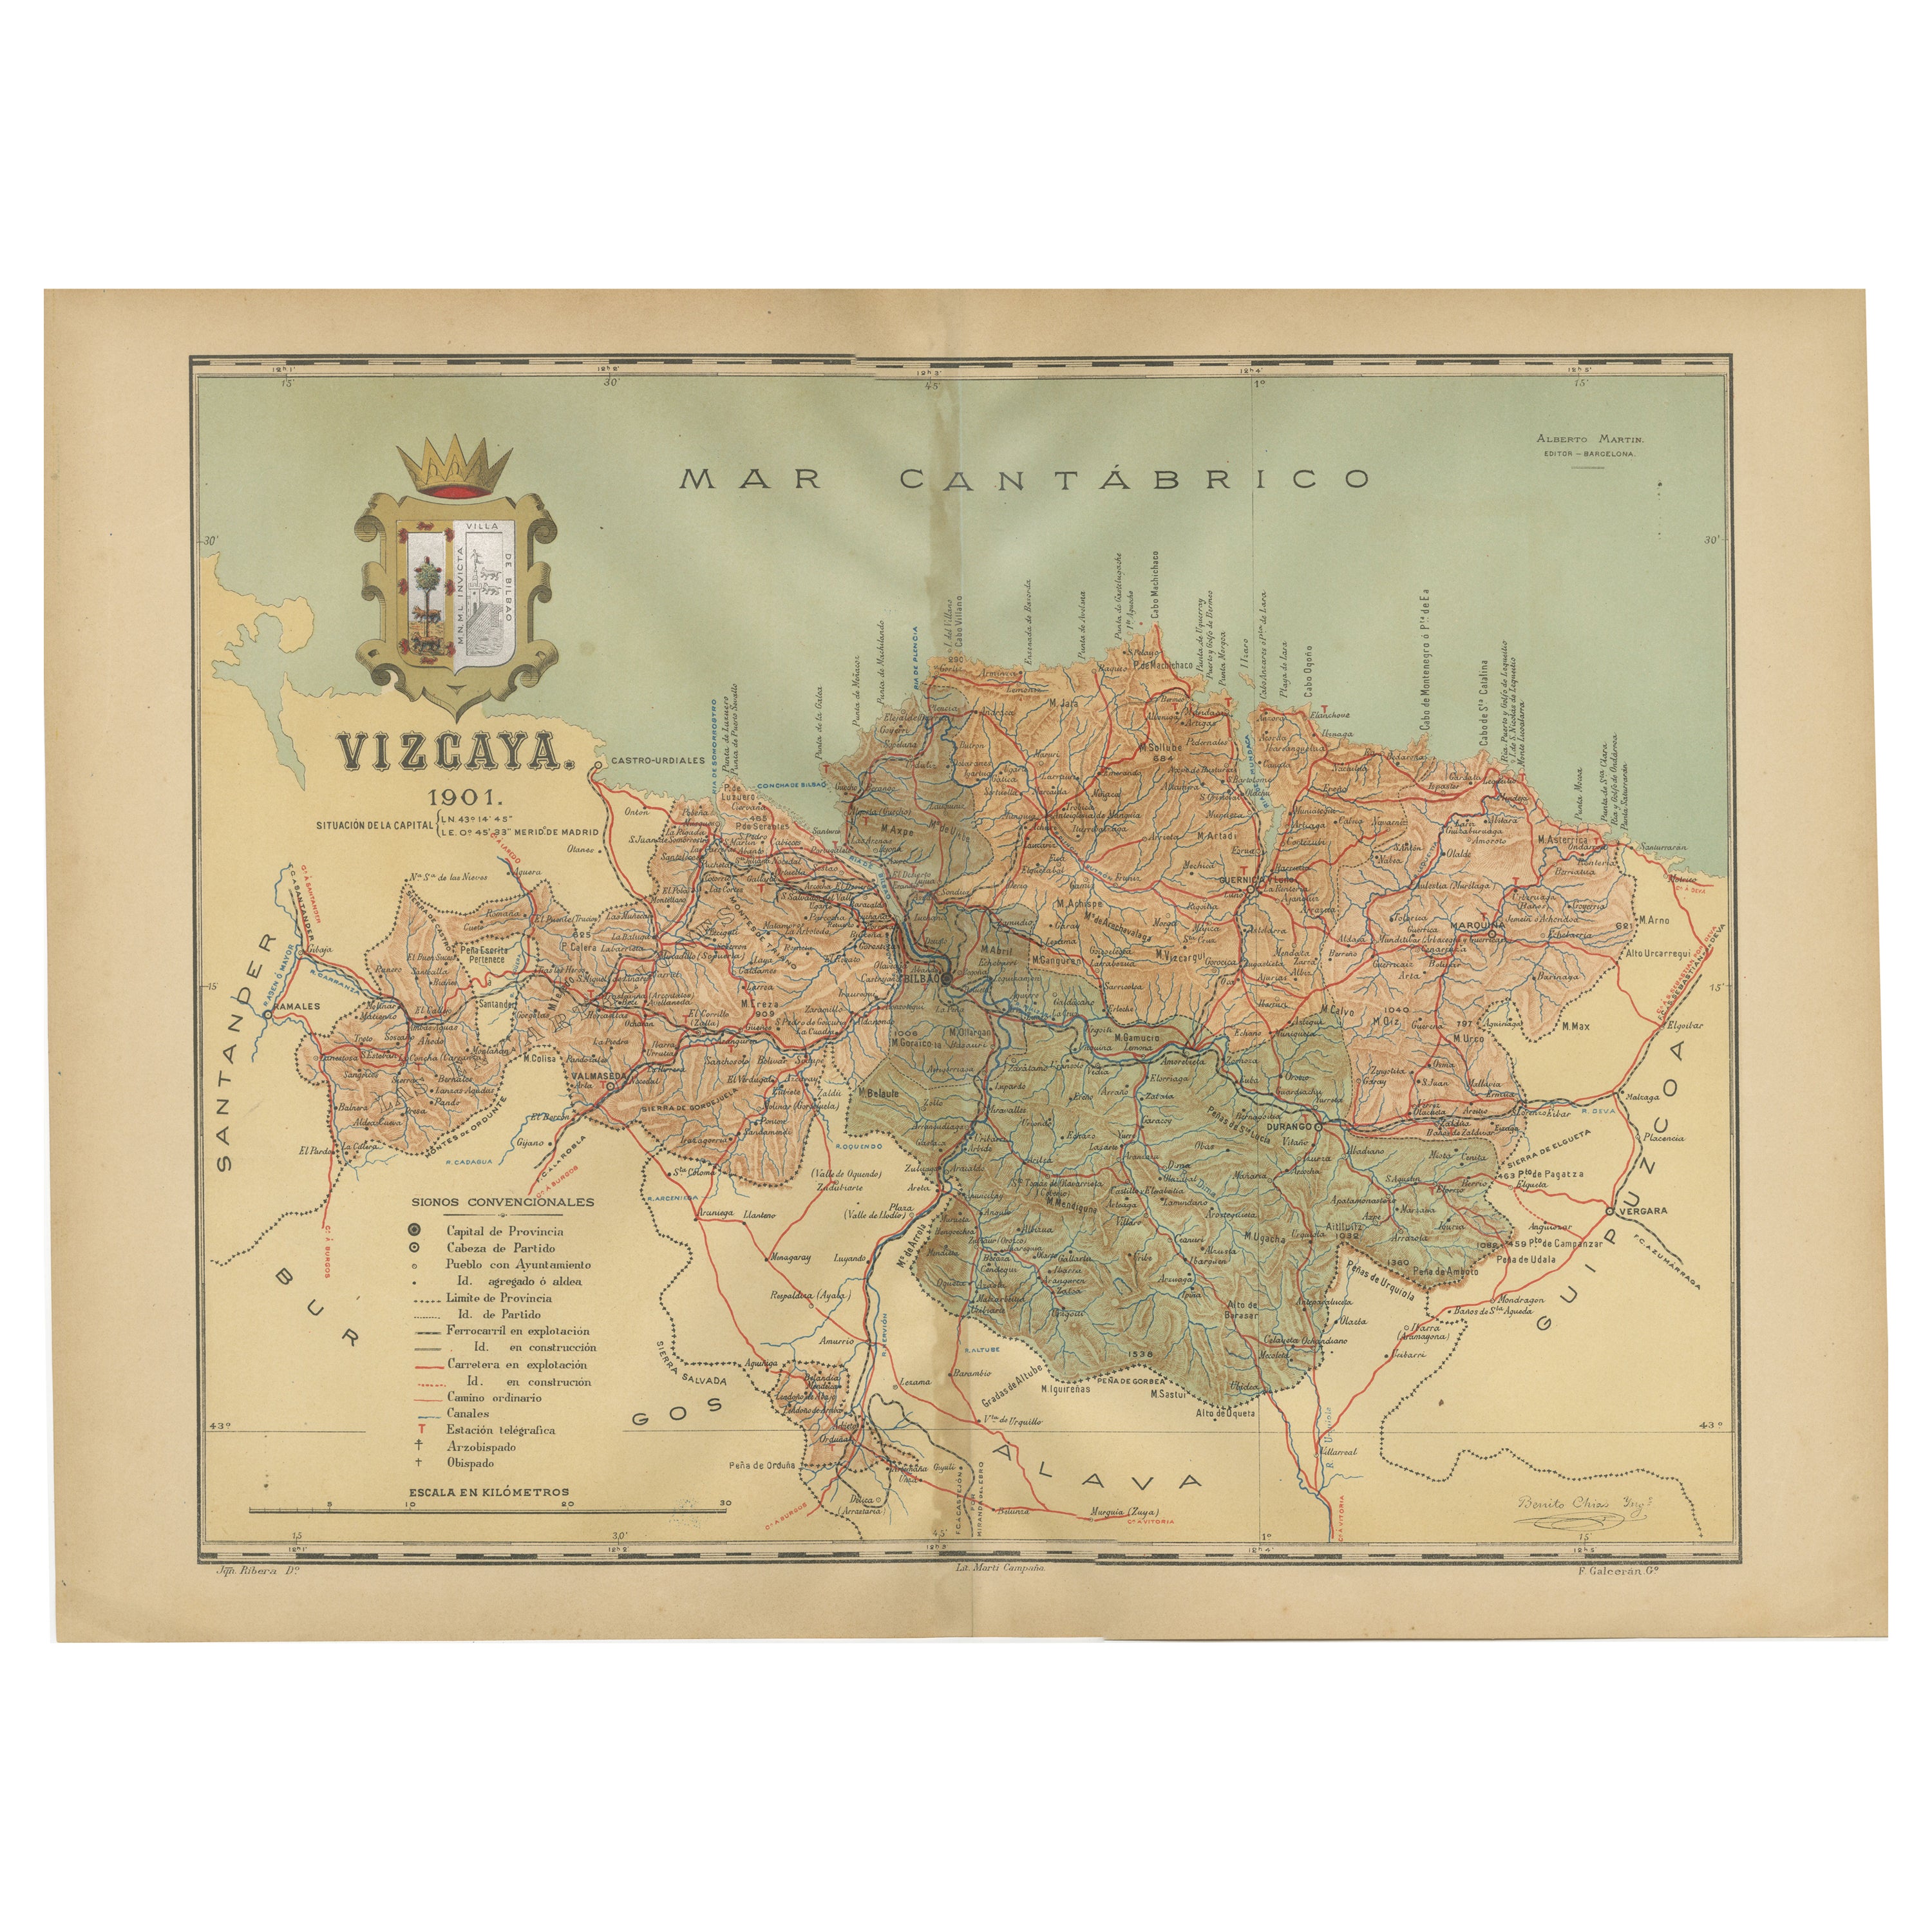 Cartographic Heritage: The 1901 Map of the Vizcaya Province in Spain For Sale